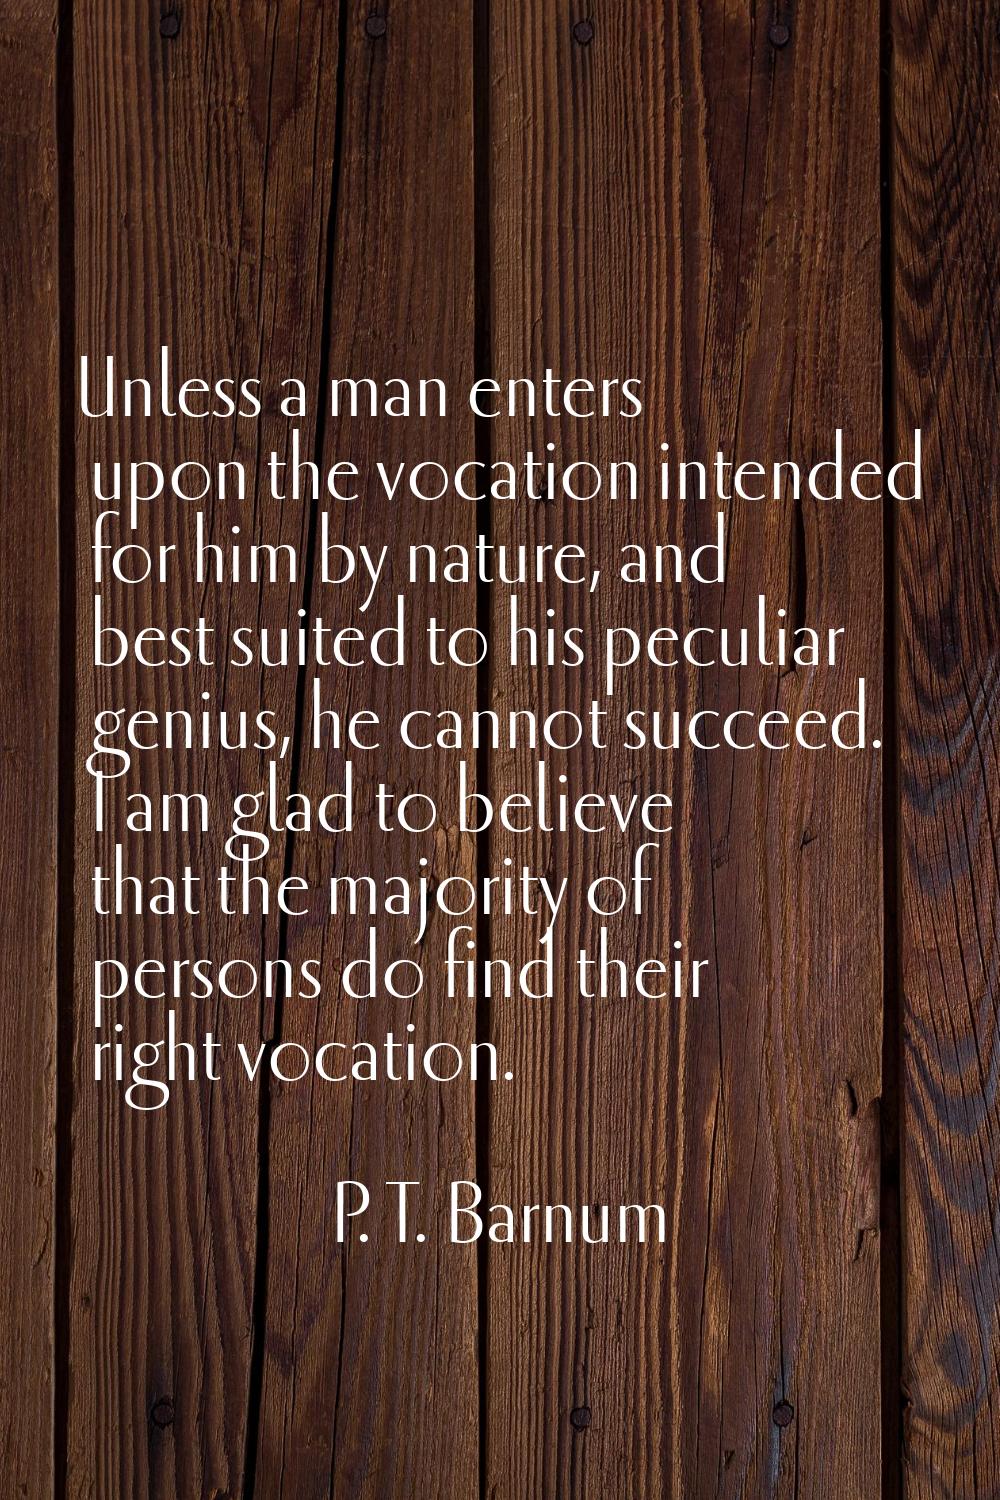 Unless a man enters upon the vocation intended for him by nature, and best suited to his peculiar g